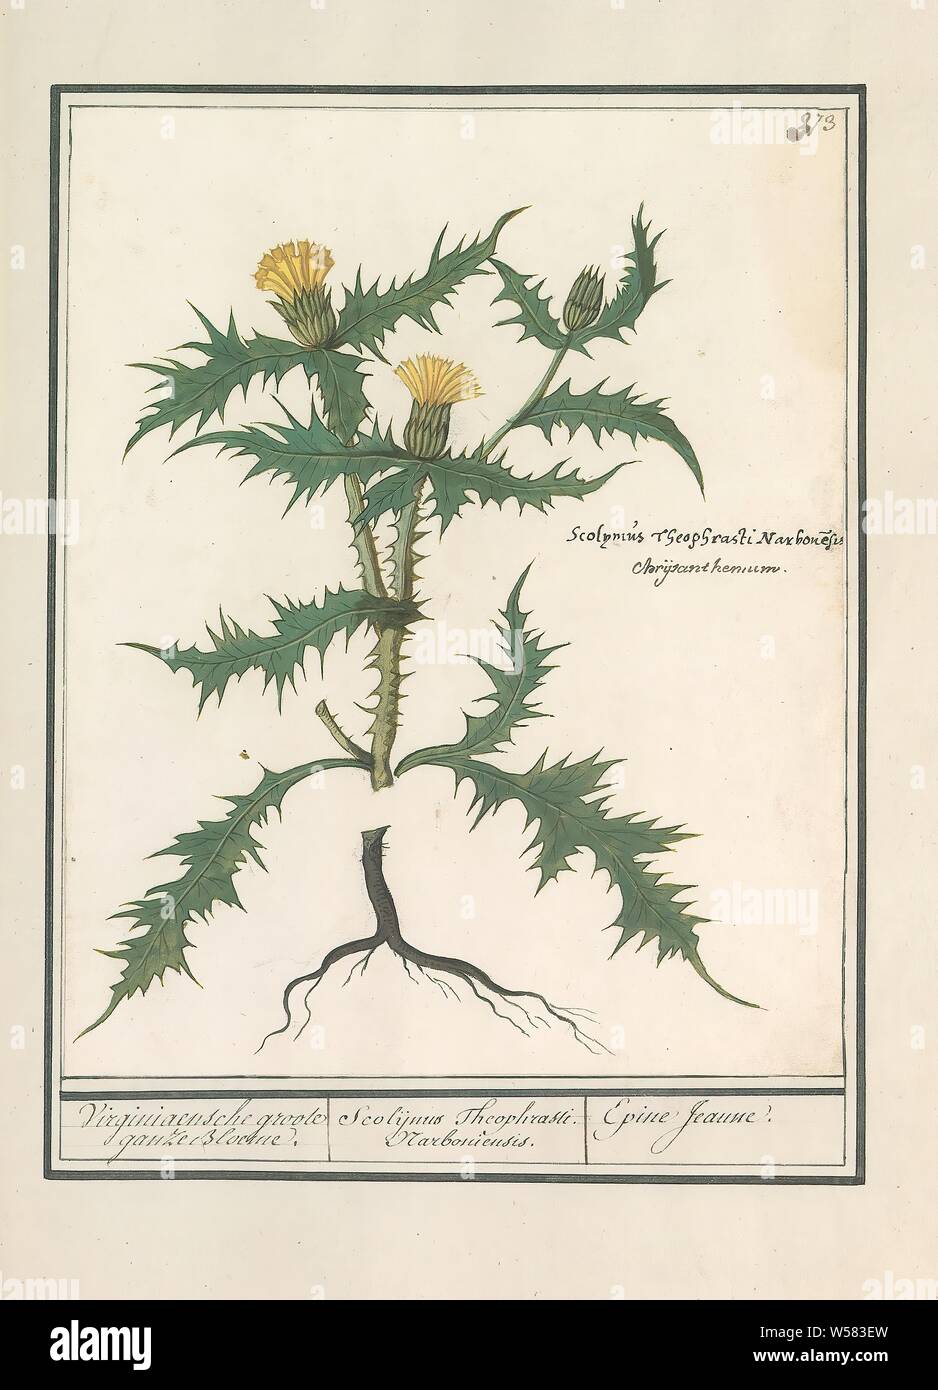 Yellow thistle (Scolymus hispanicus), Virginia large geese Bloeme. / Scolijnus Theophrasti Narboniensis. / Epine Jeaune. (title on object), Yellow thistle. Numbered top right: 373. Right the Latin name. Part of the fourth album with drawings of flowers and mushrooms. Eleventh of twelve albums with drawings of animals, birds and plants known around 1600, commissioned by Emperor Rudolf II. With explanations in Dutch, Latin and French, plants and herbs: thistle, Anselmus Boetius de Boodt, 1596 - 1610, paper, watercolor (paint), deck paint, chalk, pen, h 243 mm × w 196 mm Stock Photo